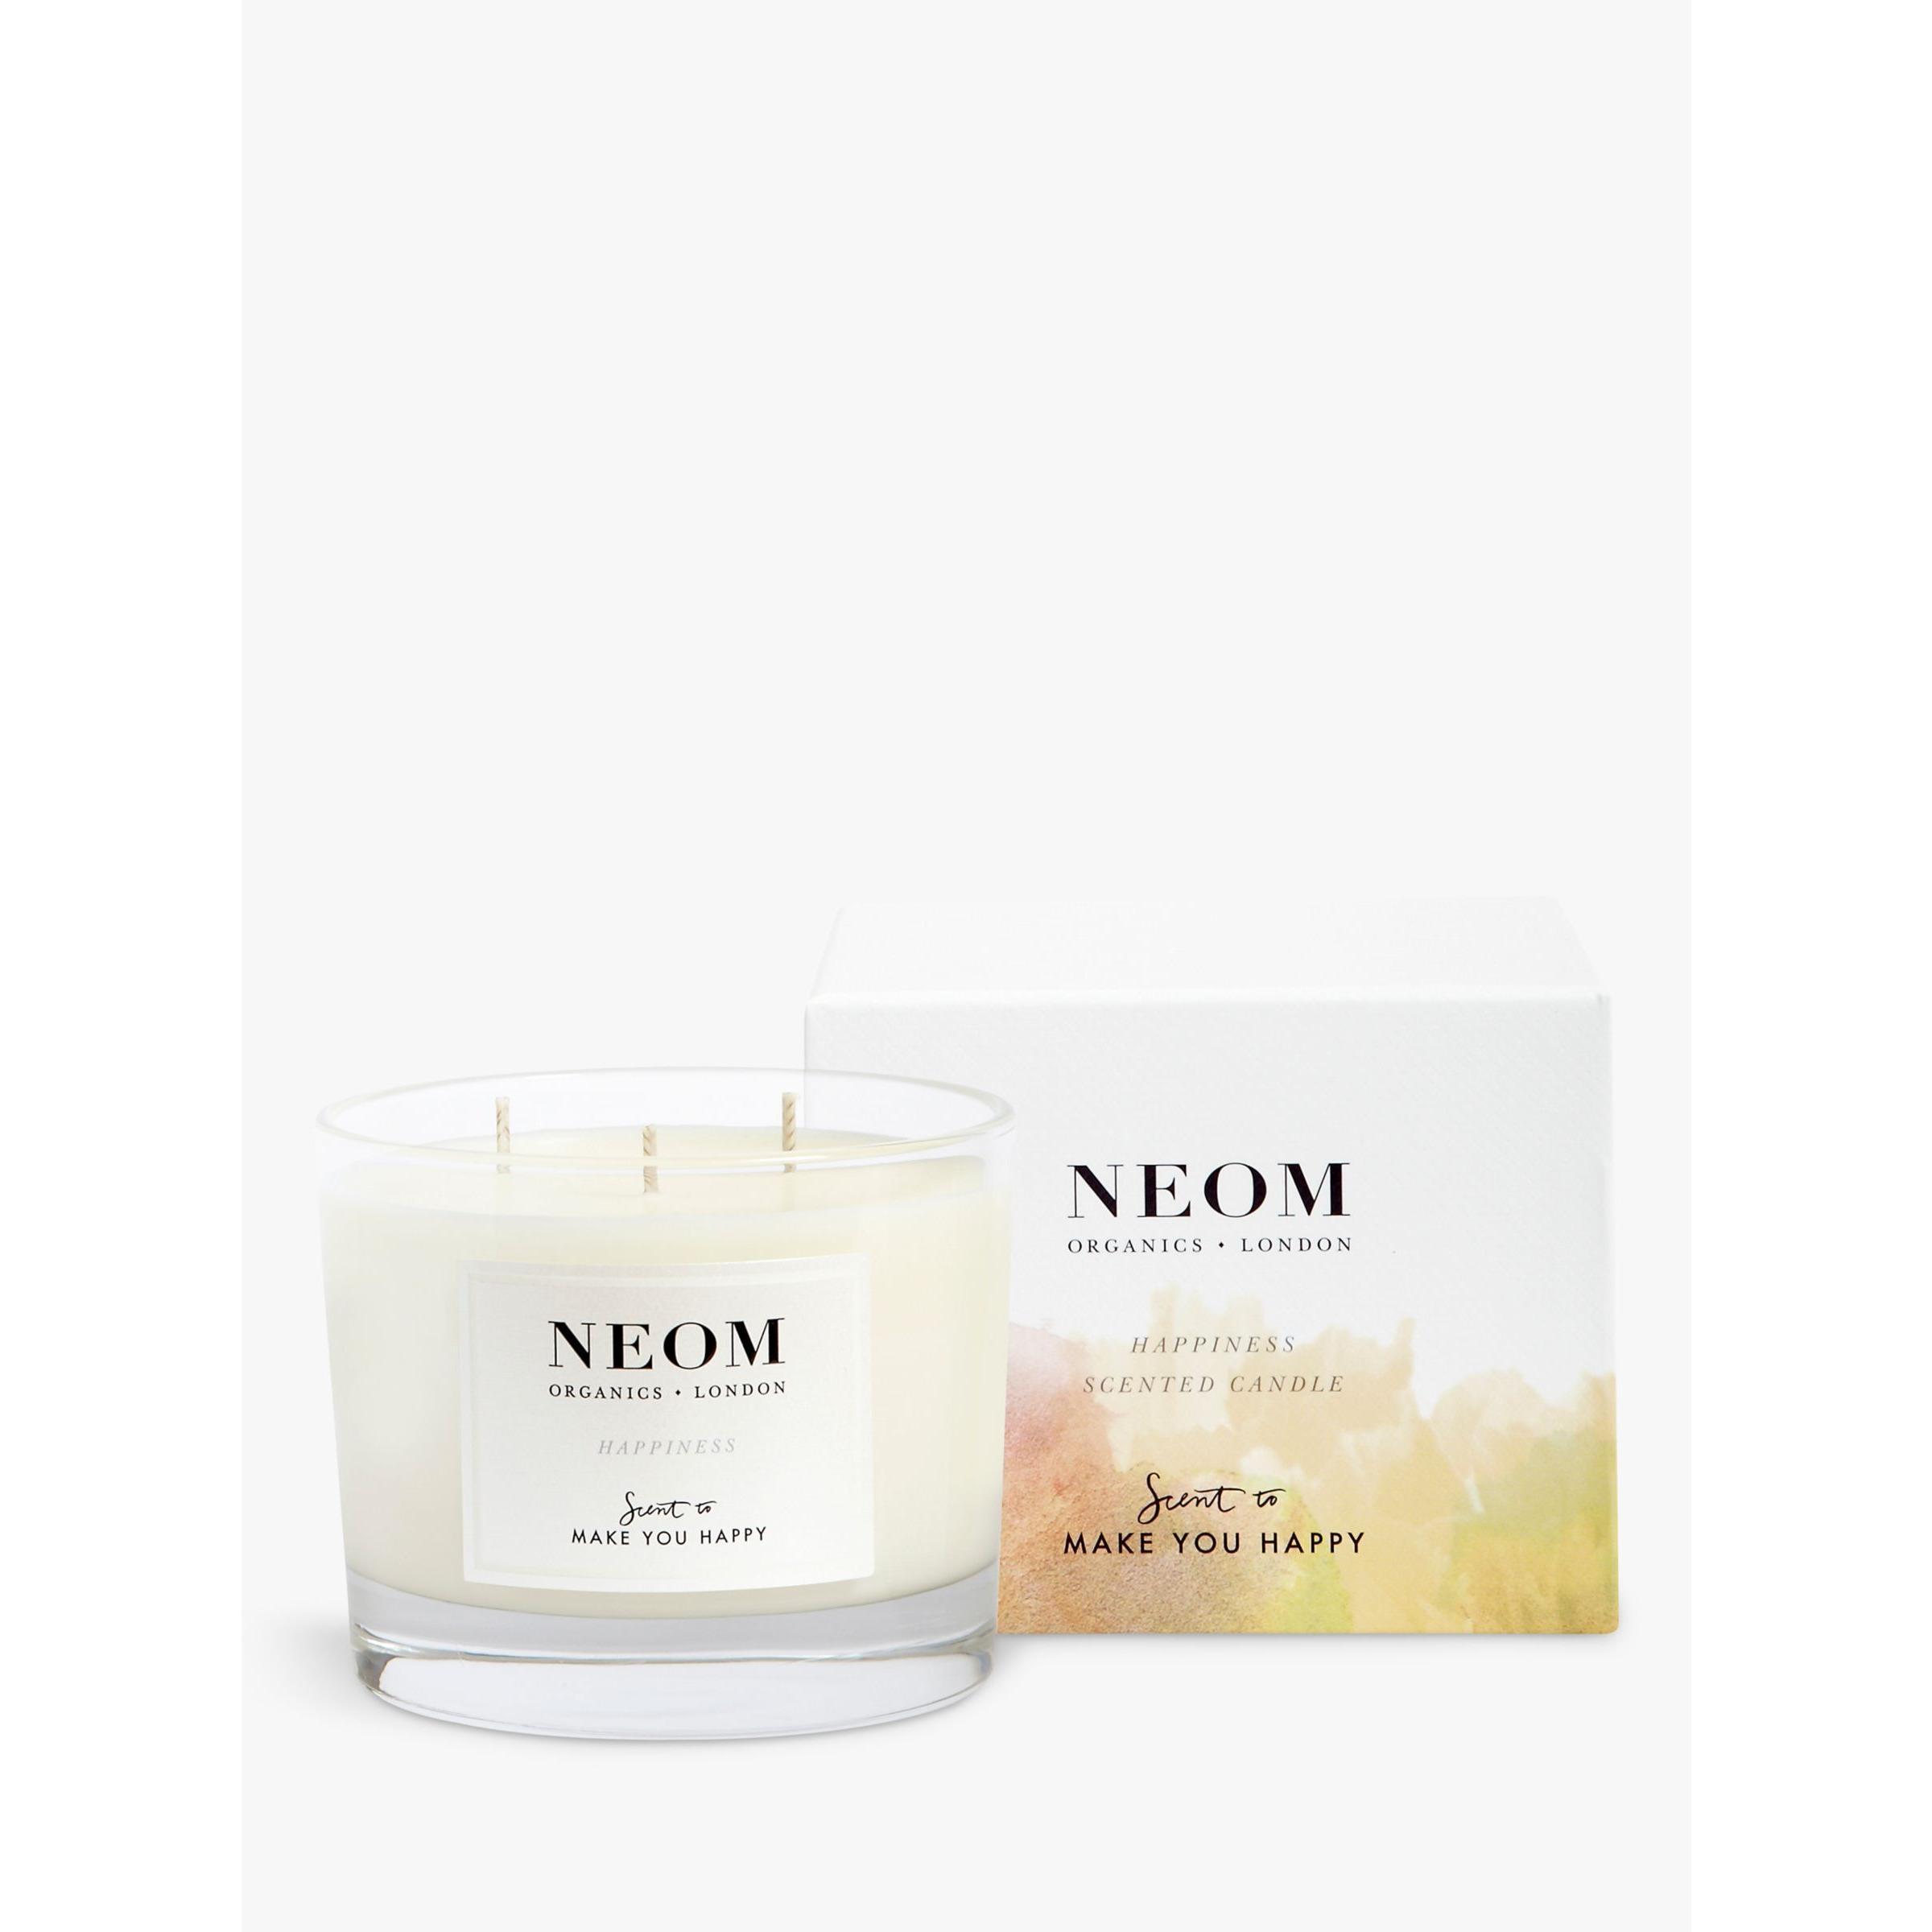 Neom Organics London Happiness 3 Wick Scented Candle - image 1